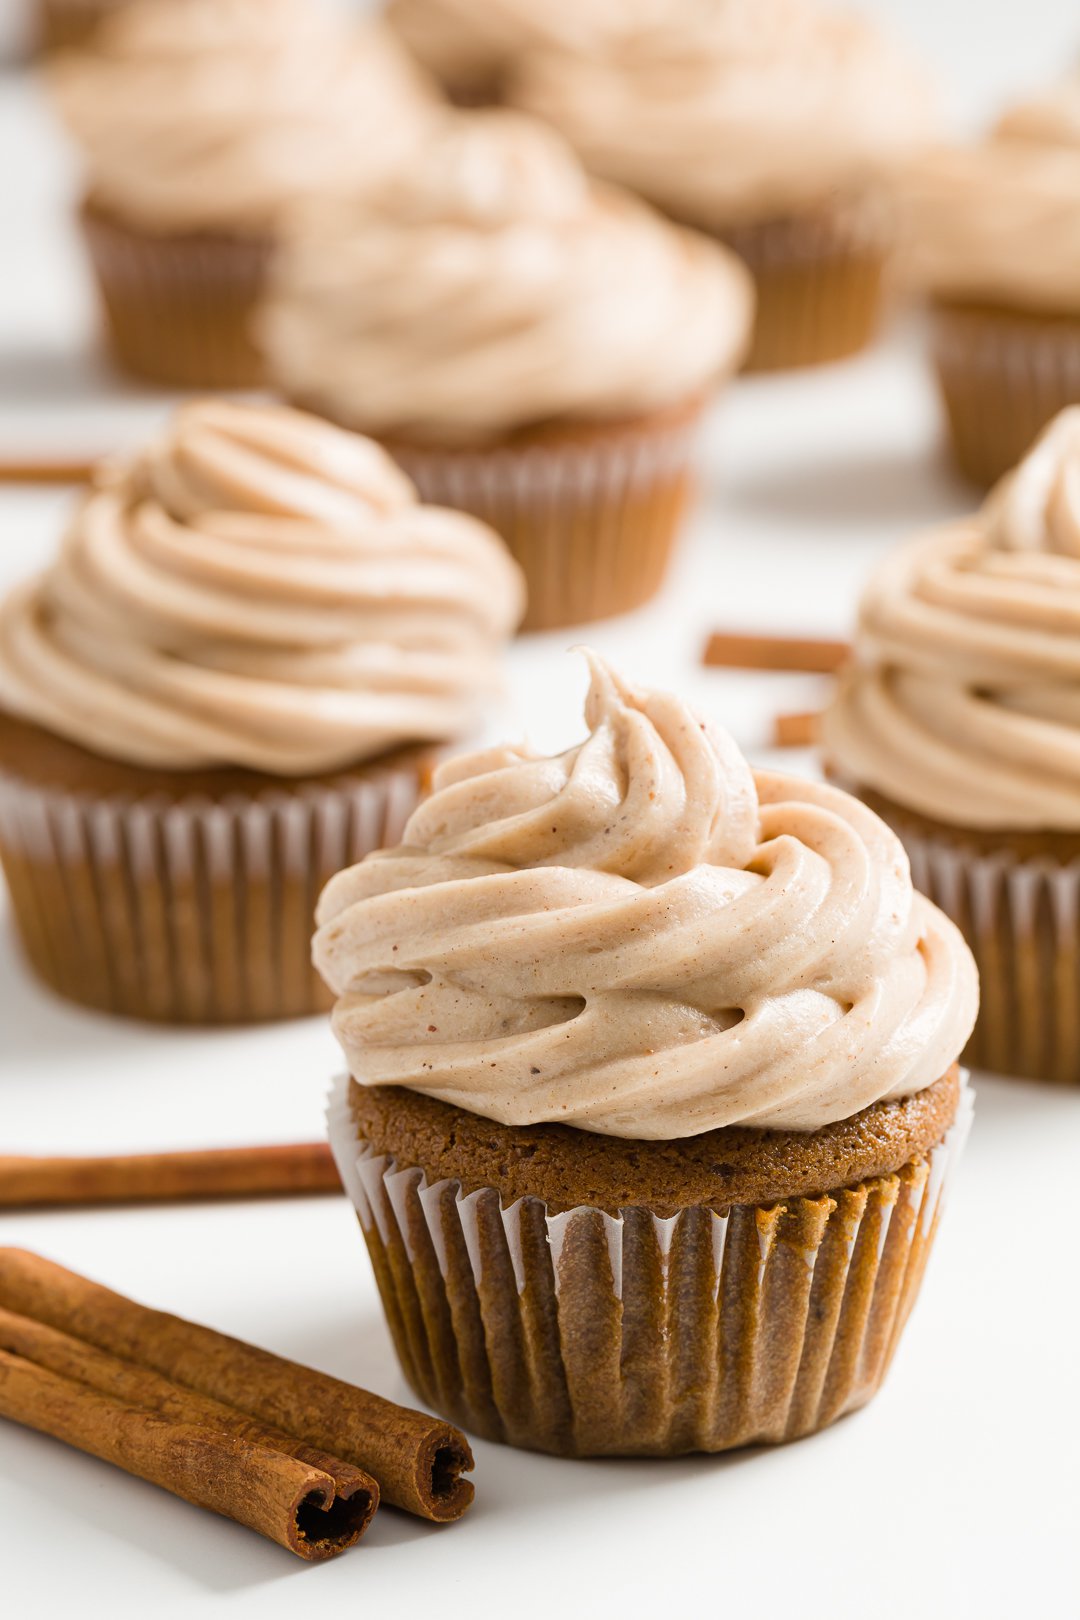 cinnamon cream cheese frosting on cupcakes